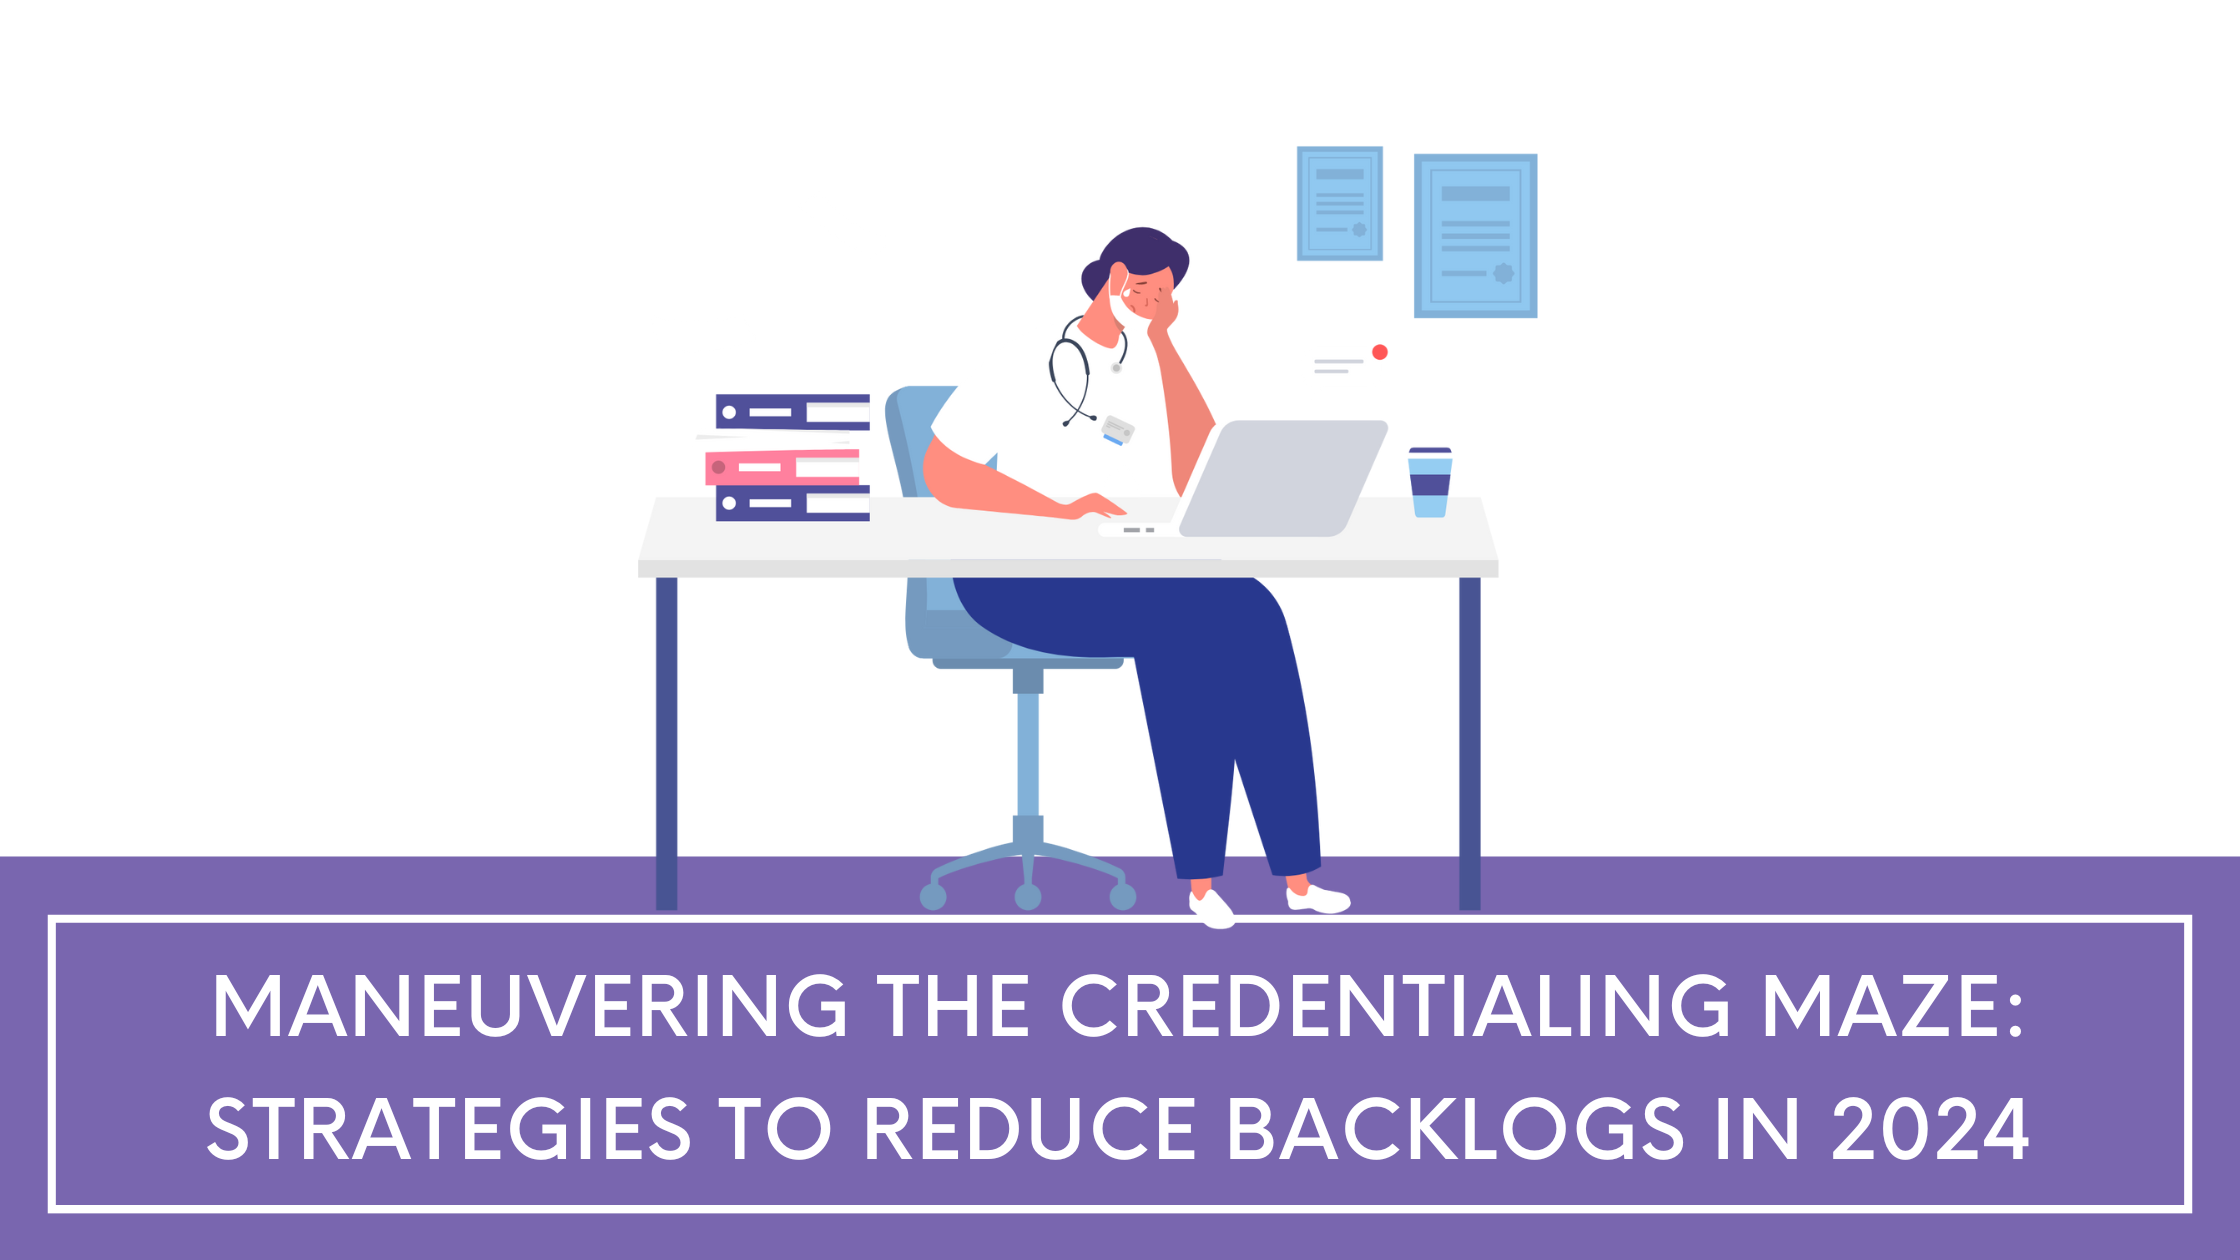 strategies for credentialing maze